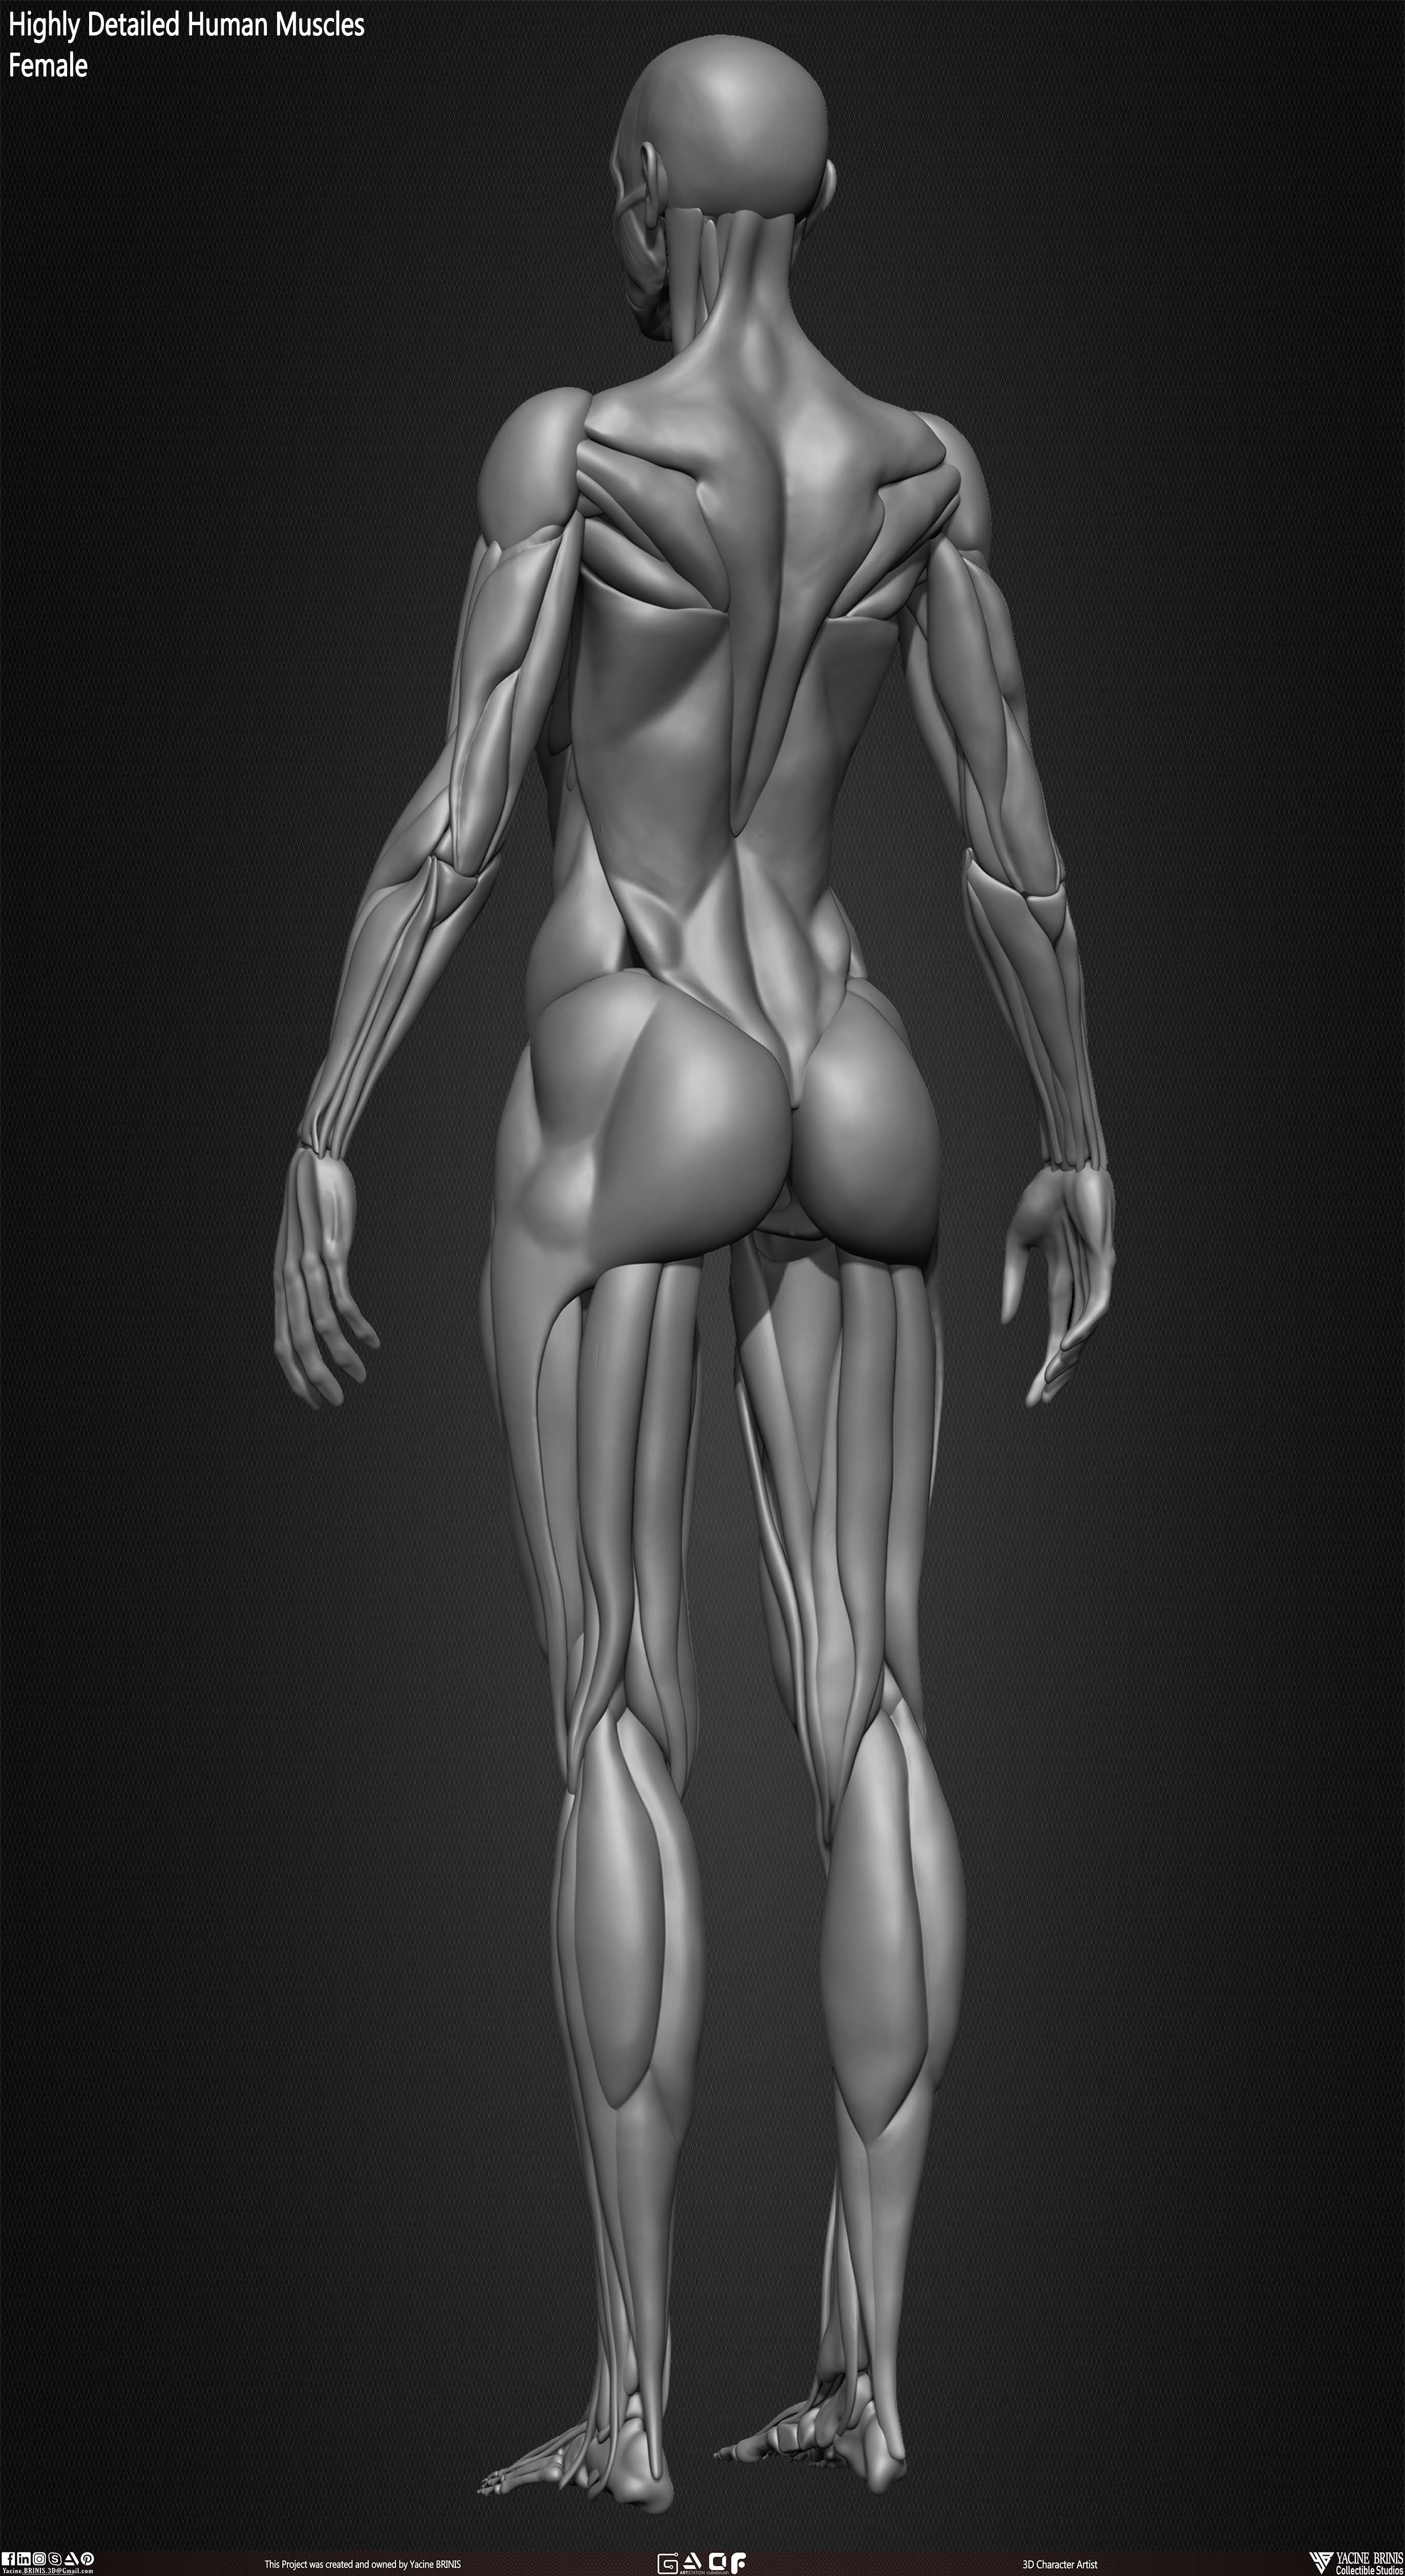 Female Human Muscles 3D Model sculpted by Yacine BRINIS 017